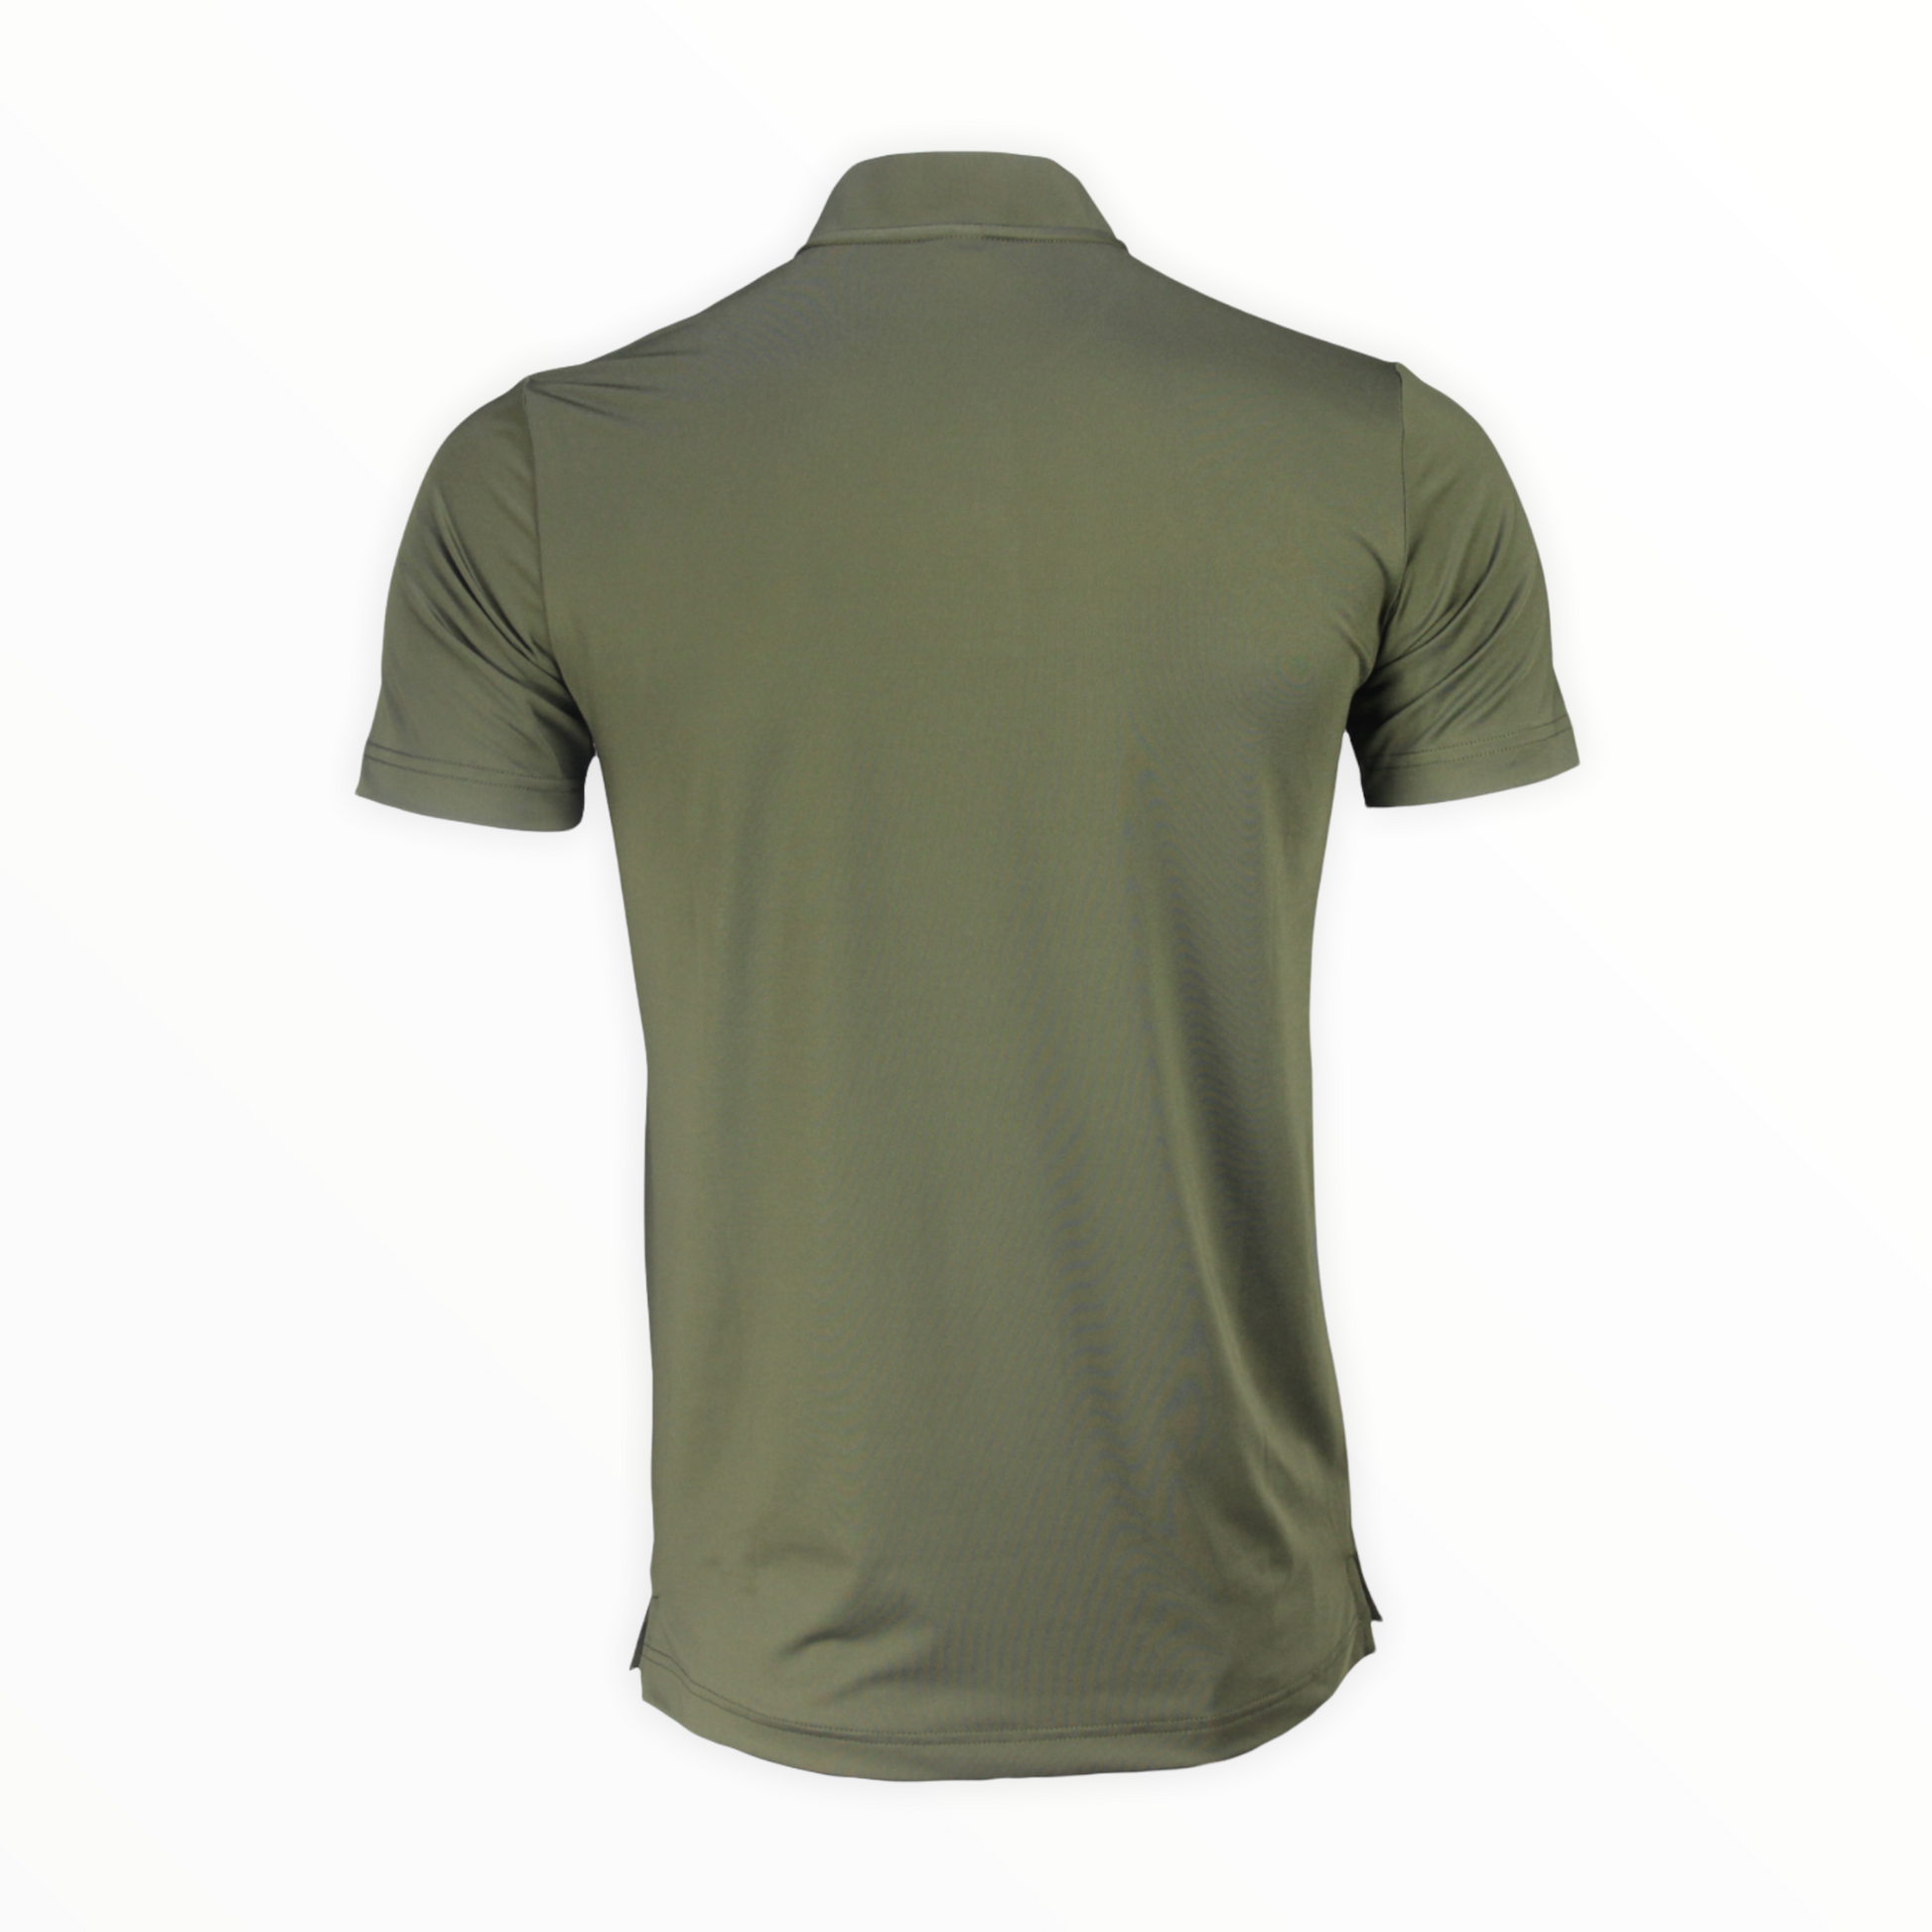 Edge golf polo - Olive back view